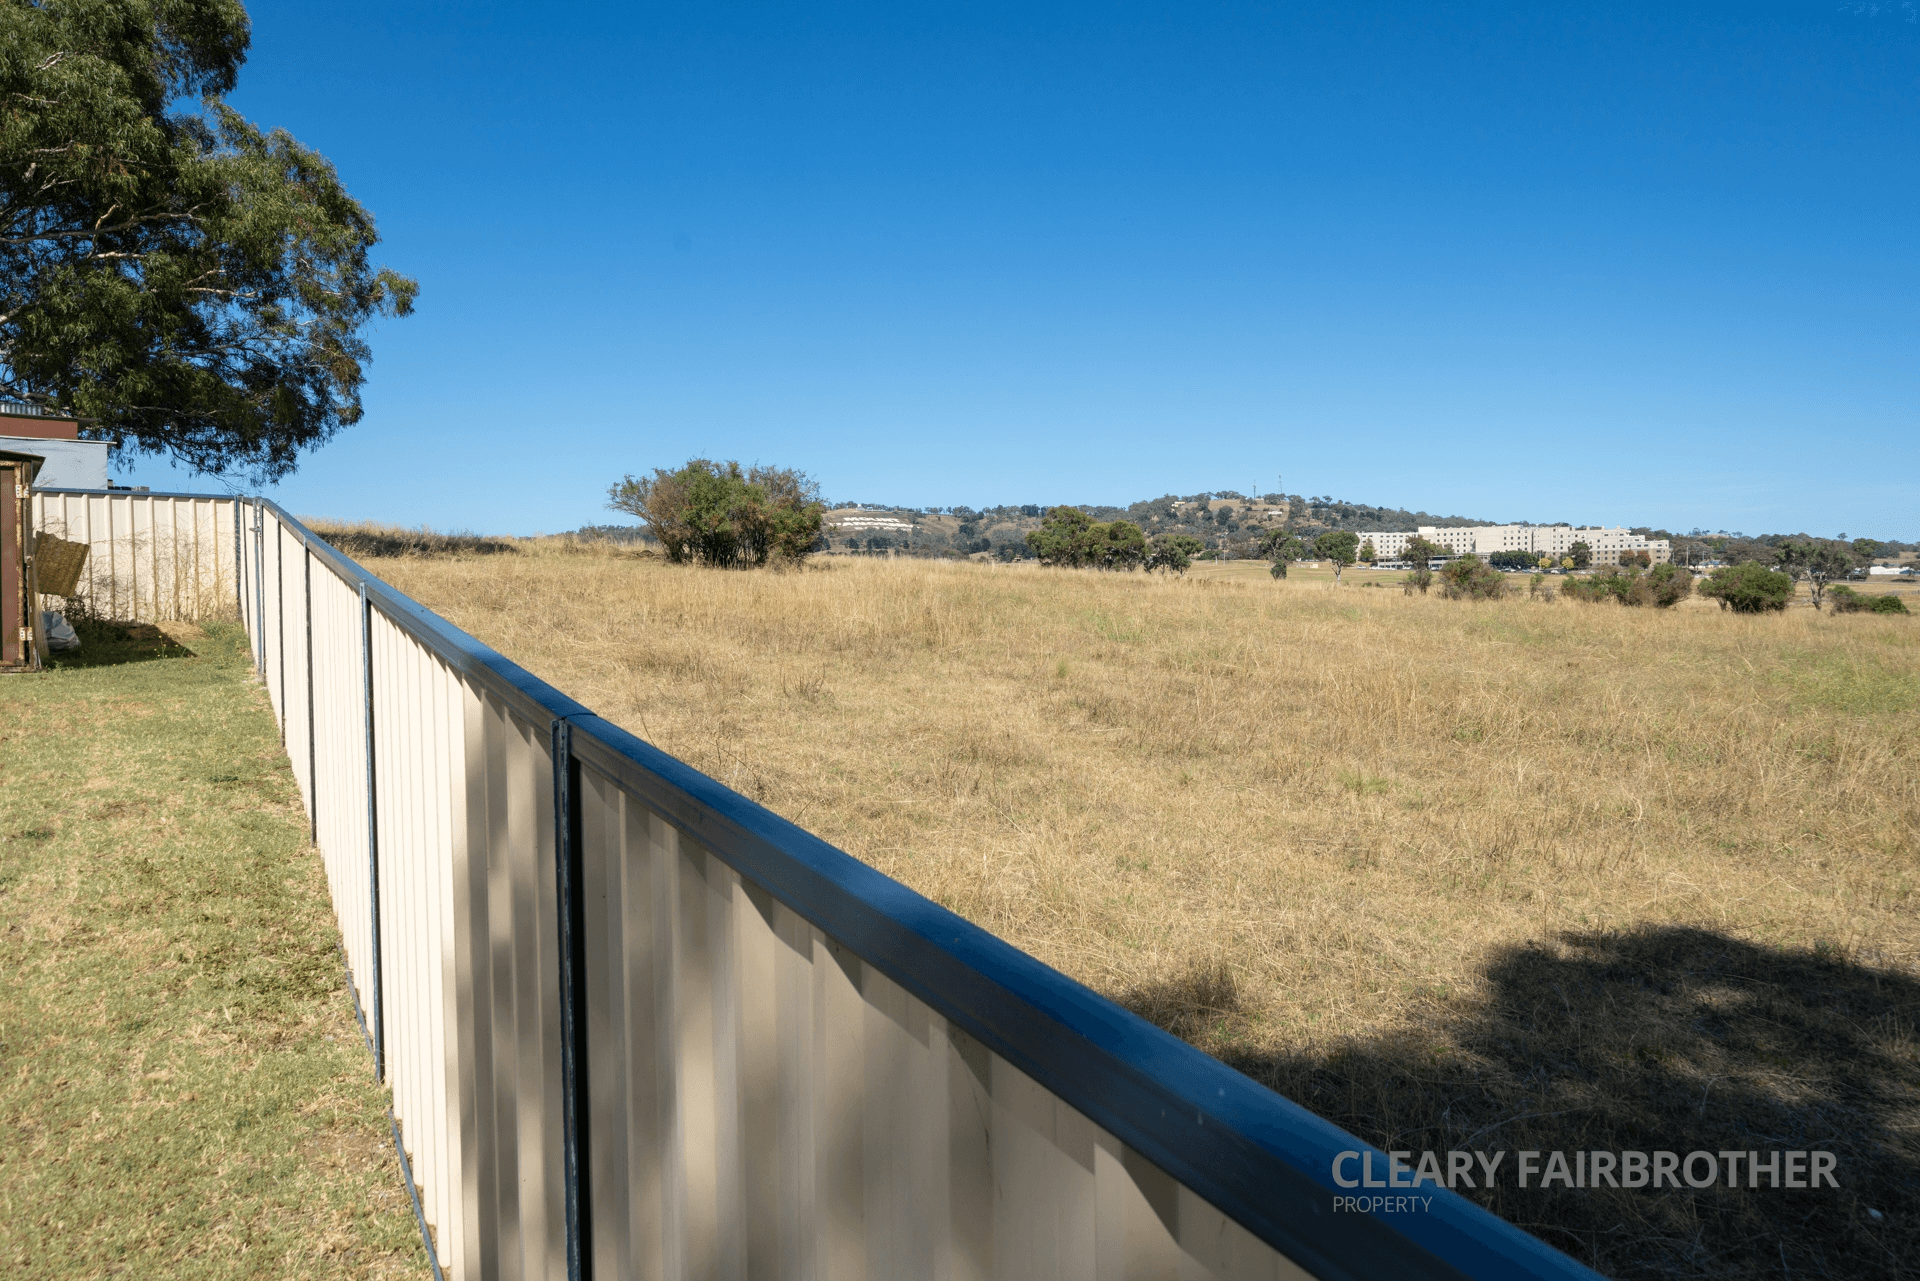 77 College Road, South Bathurst, NSW 2795